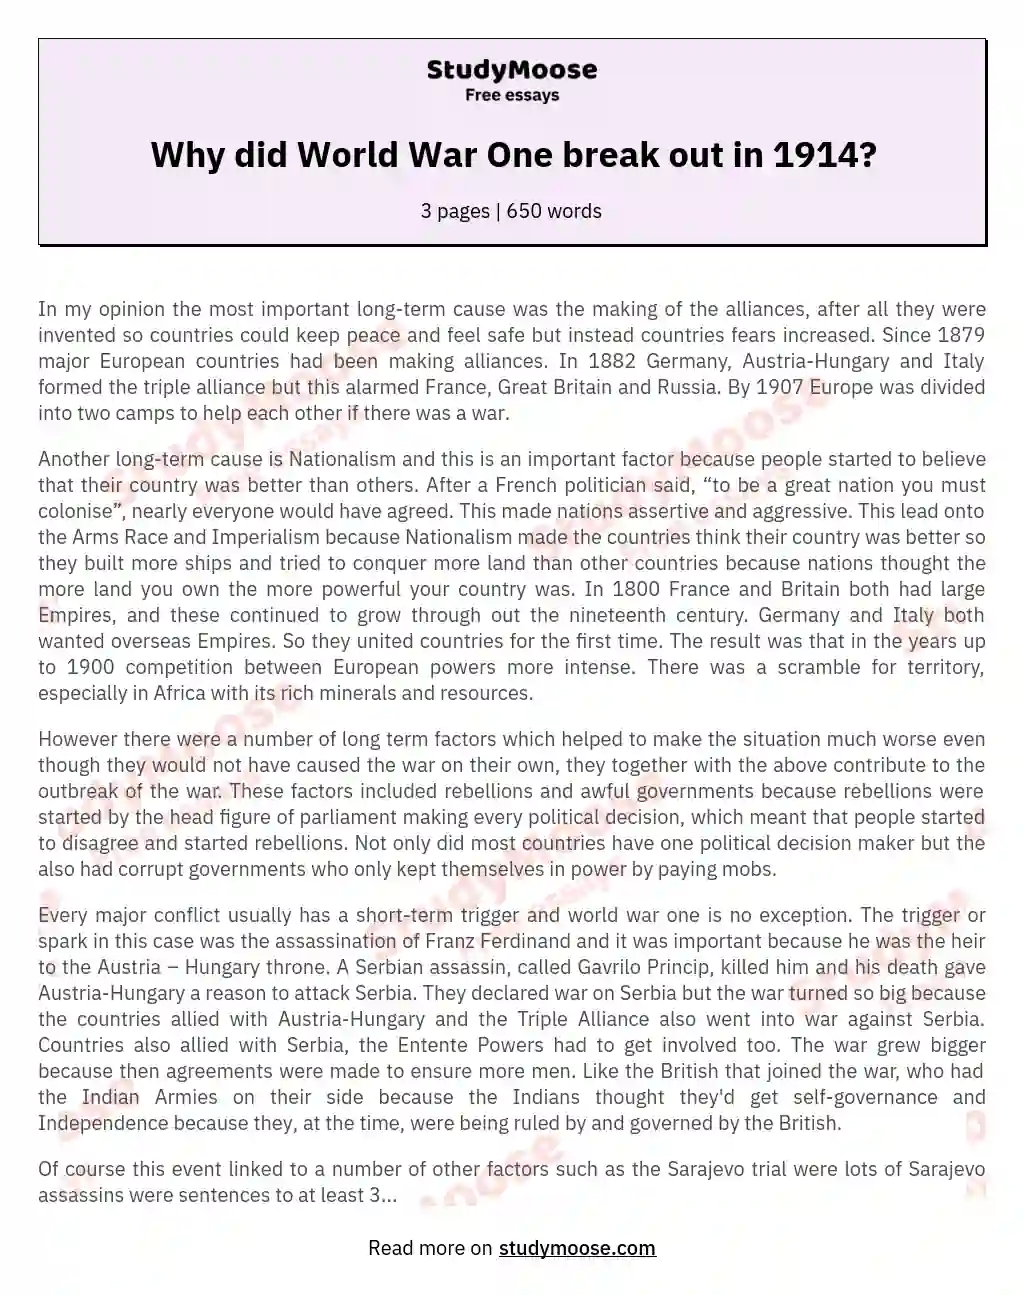 Why did World War One break out in 1914? essay